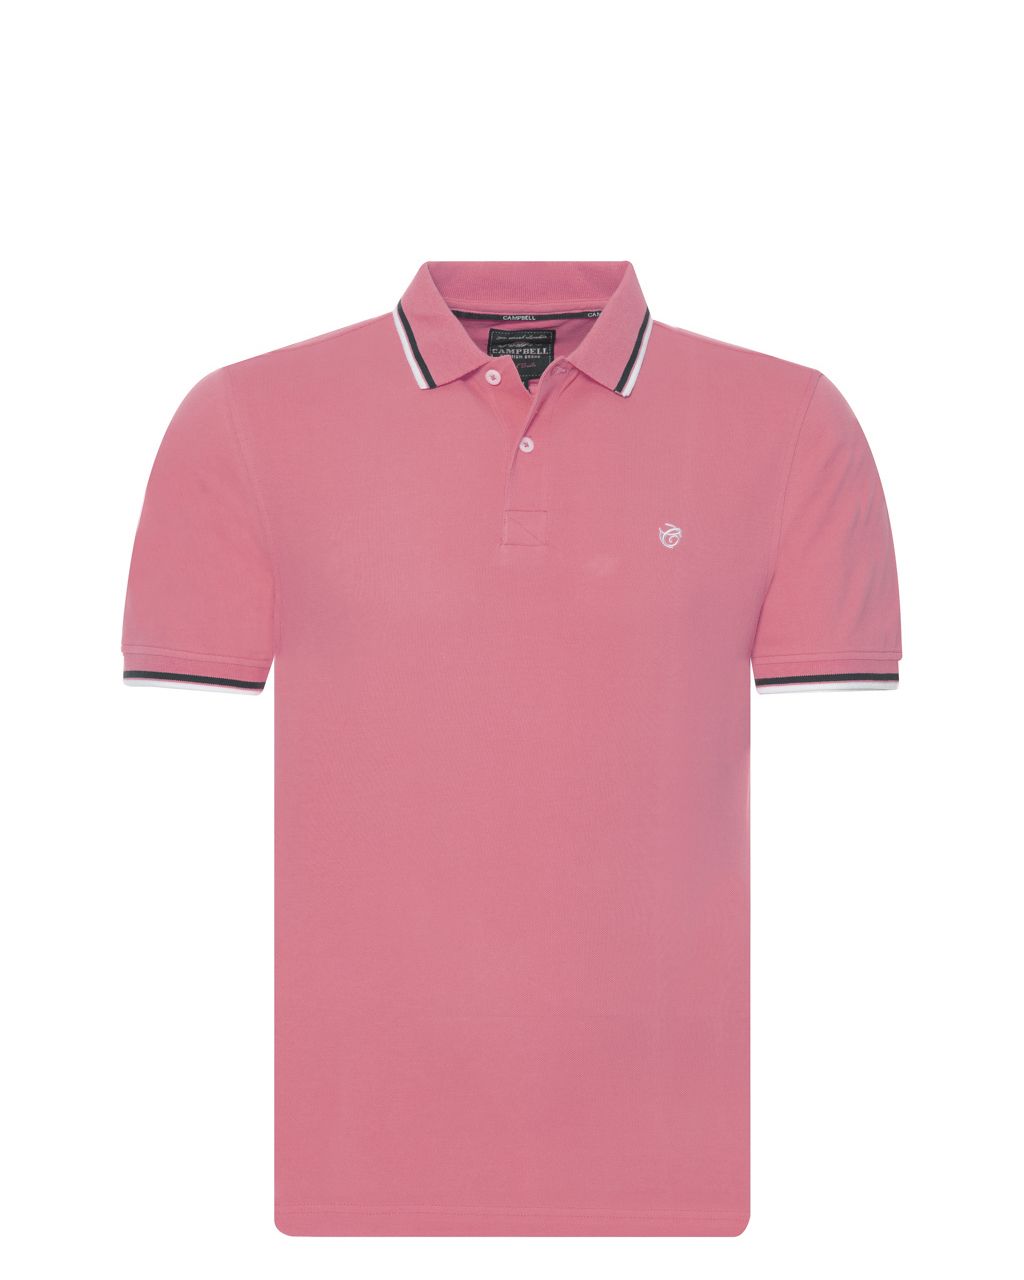 Campbell Classic Leicester Polo KM Roze uni 074096-001-L